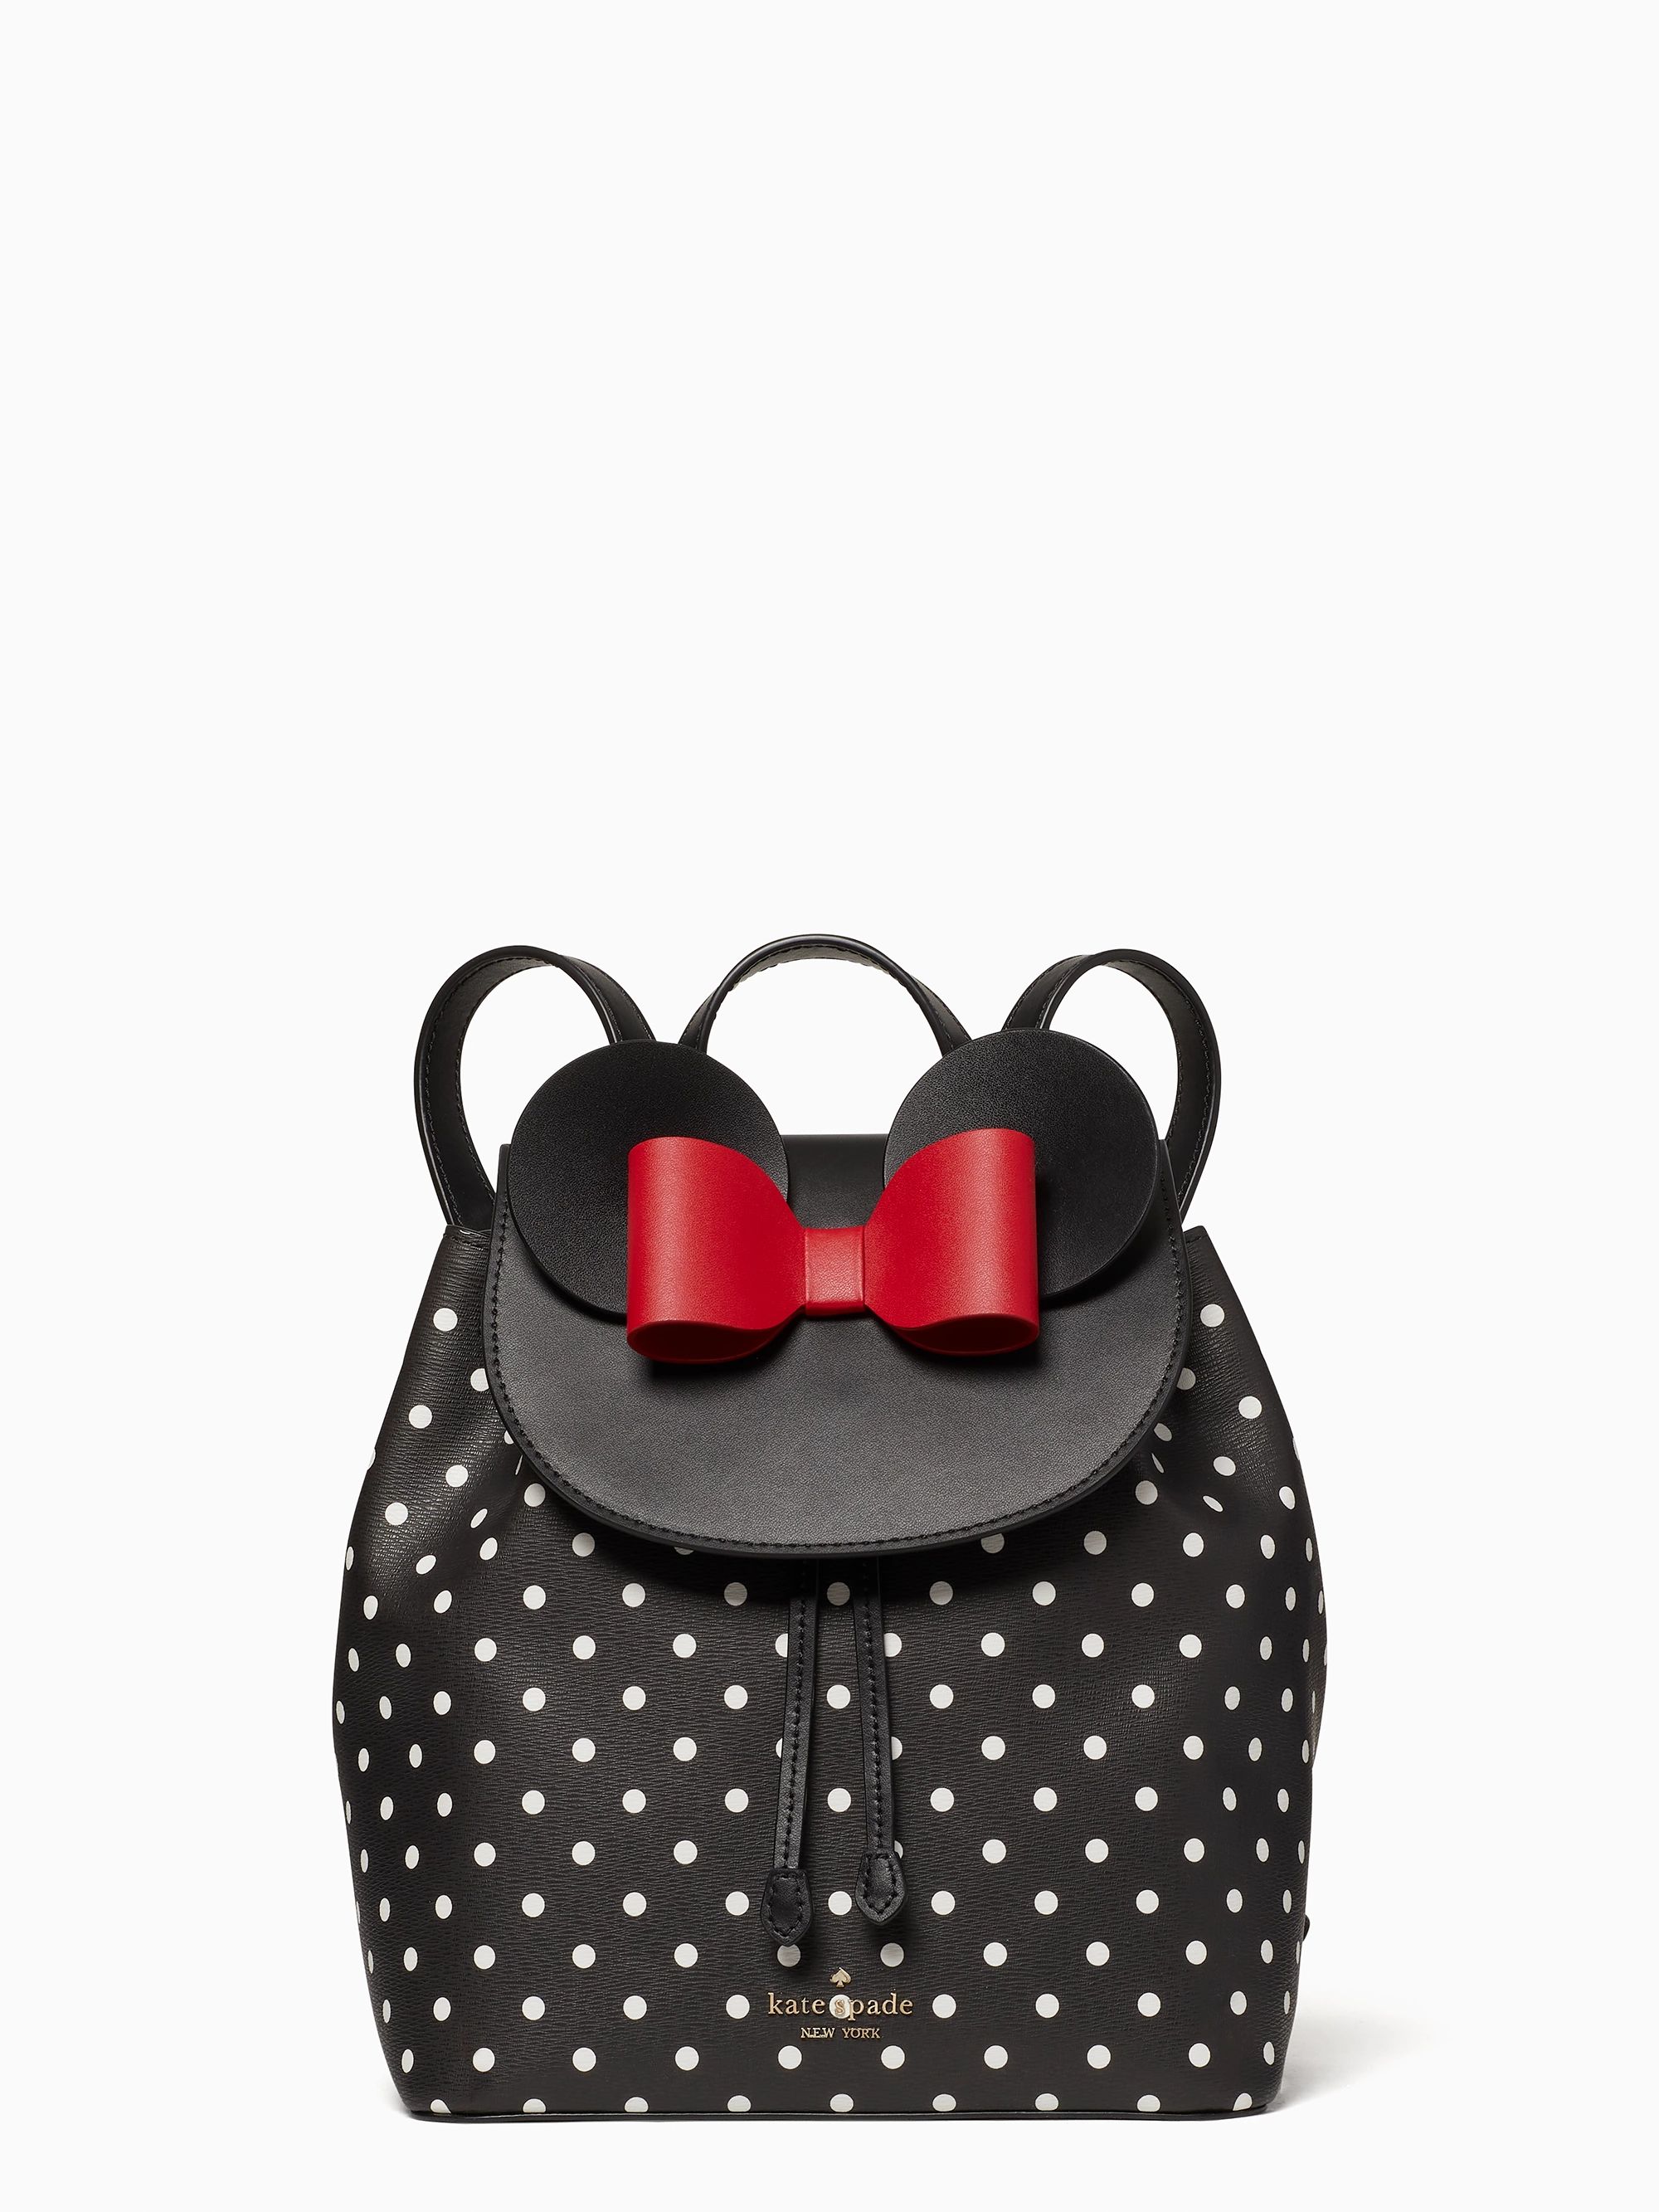 disney x kate spade new york minnie mouse backpack | Kate Spade Outlet